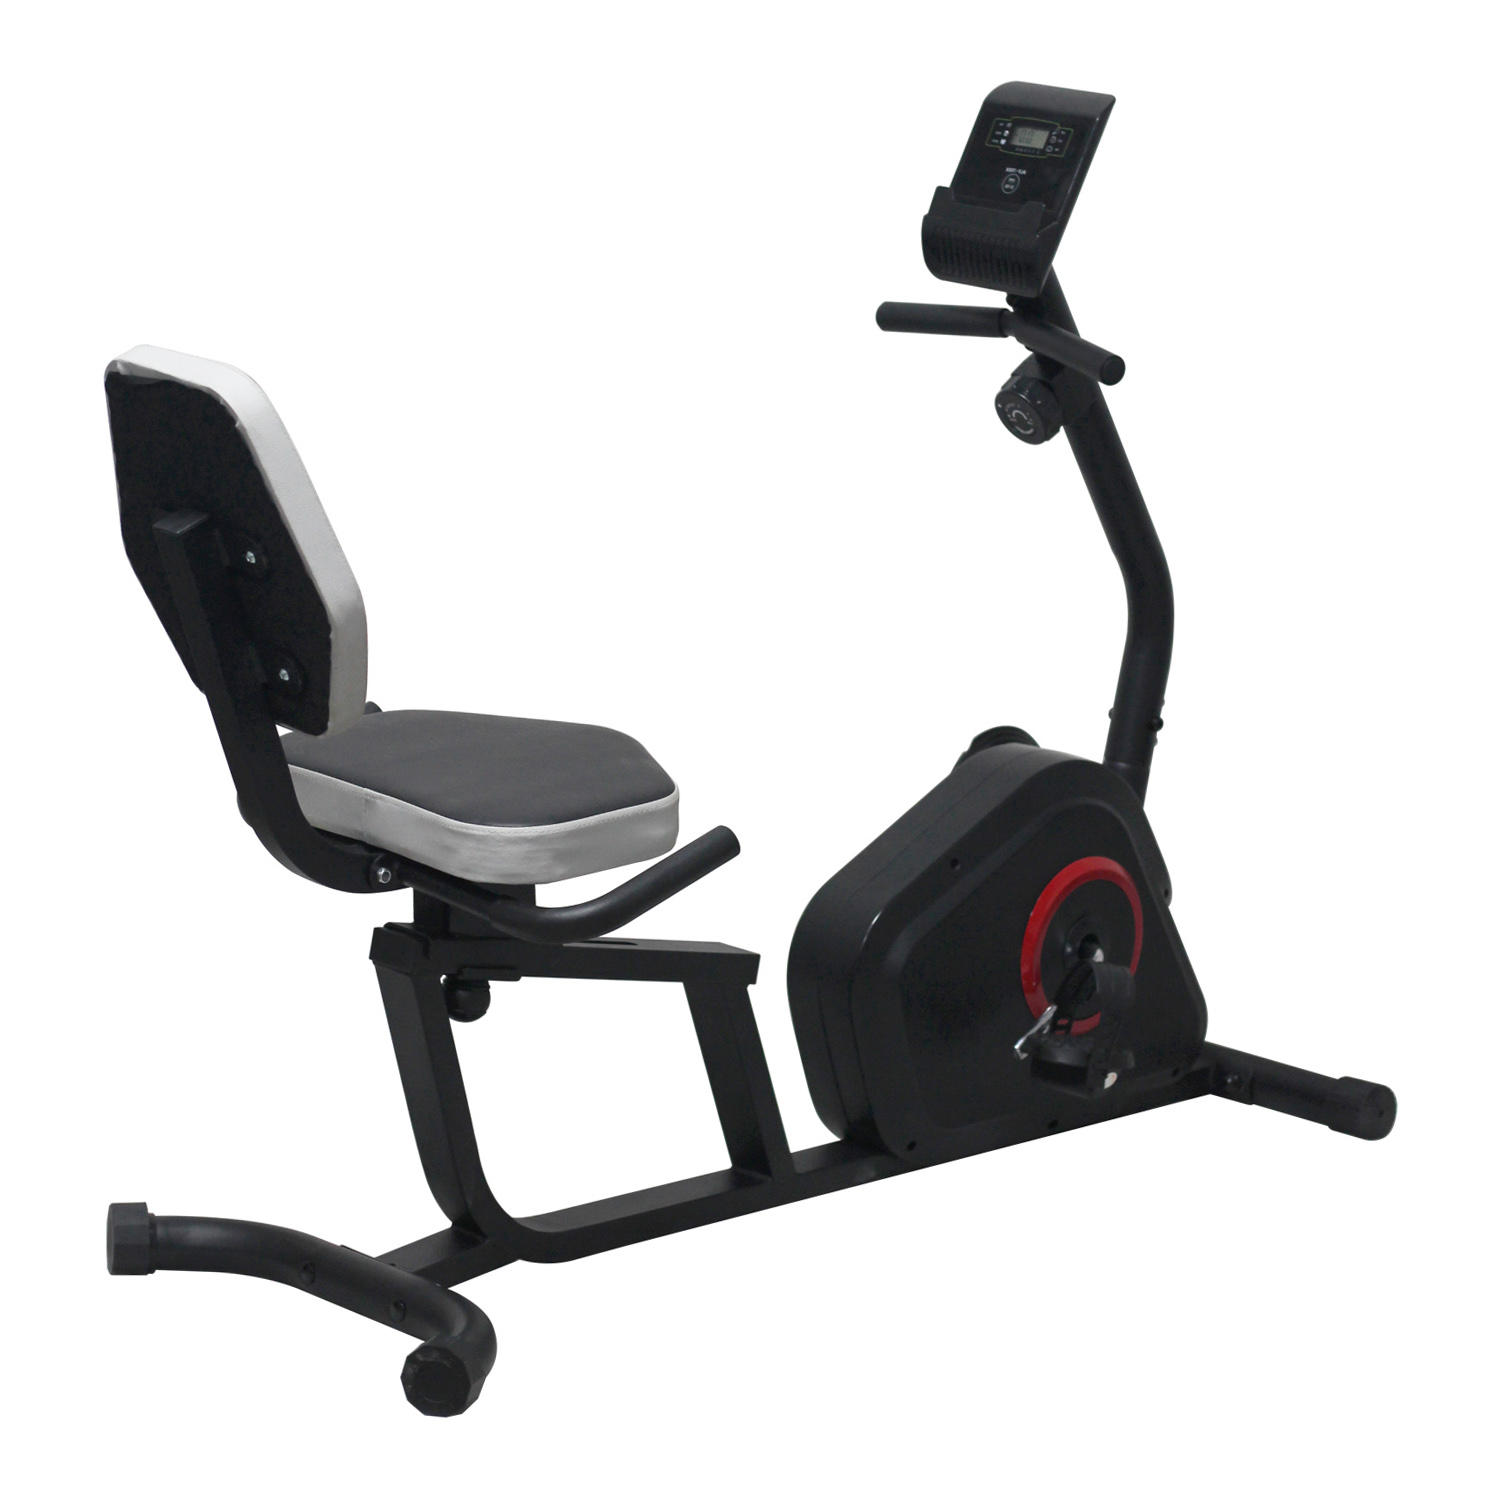 HY-9522R Magnetic Resistance Recumbent Exercise Bike